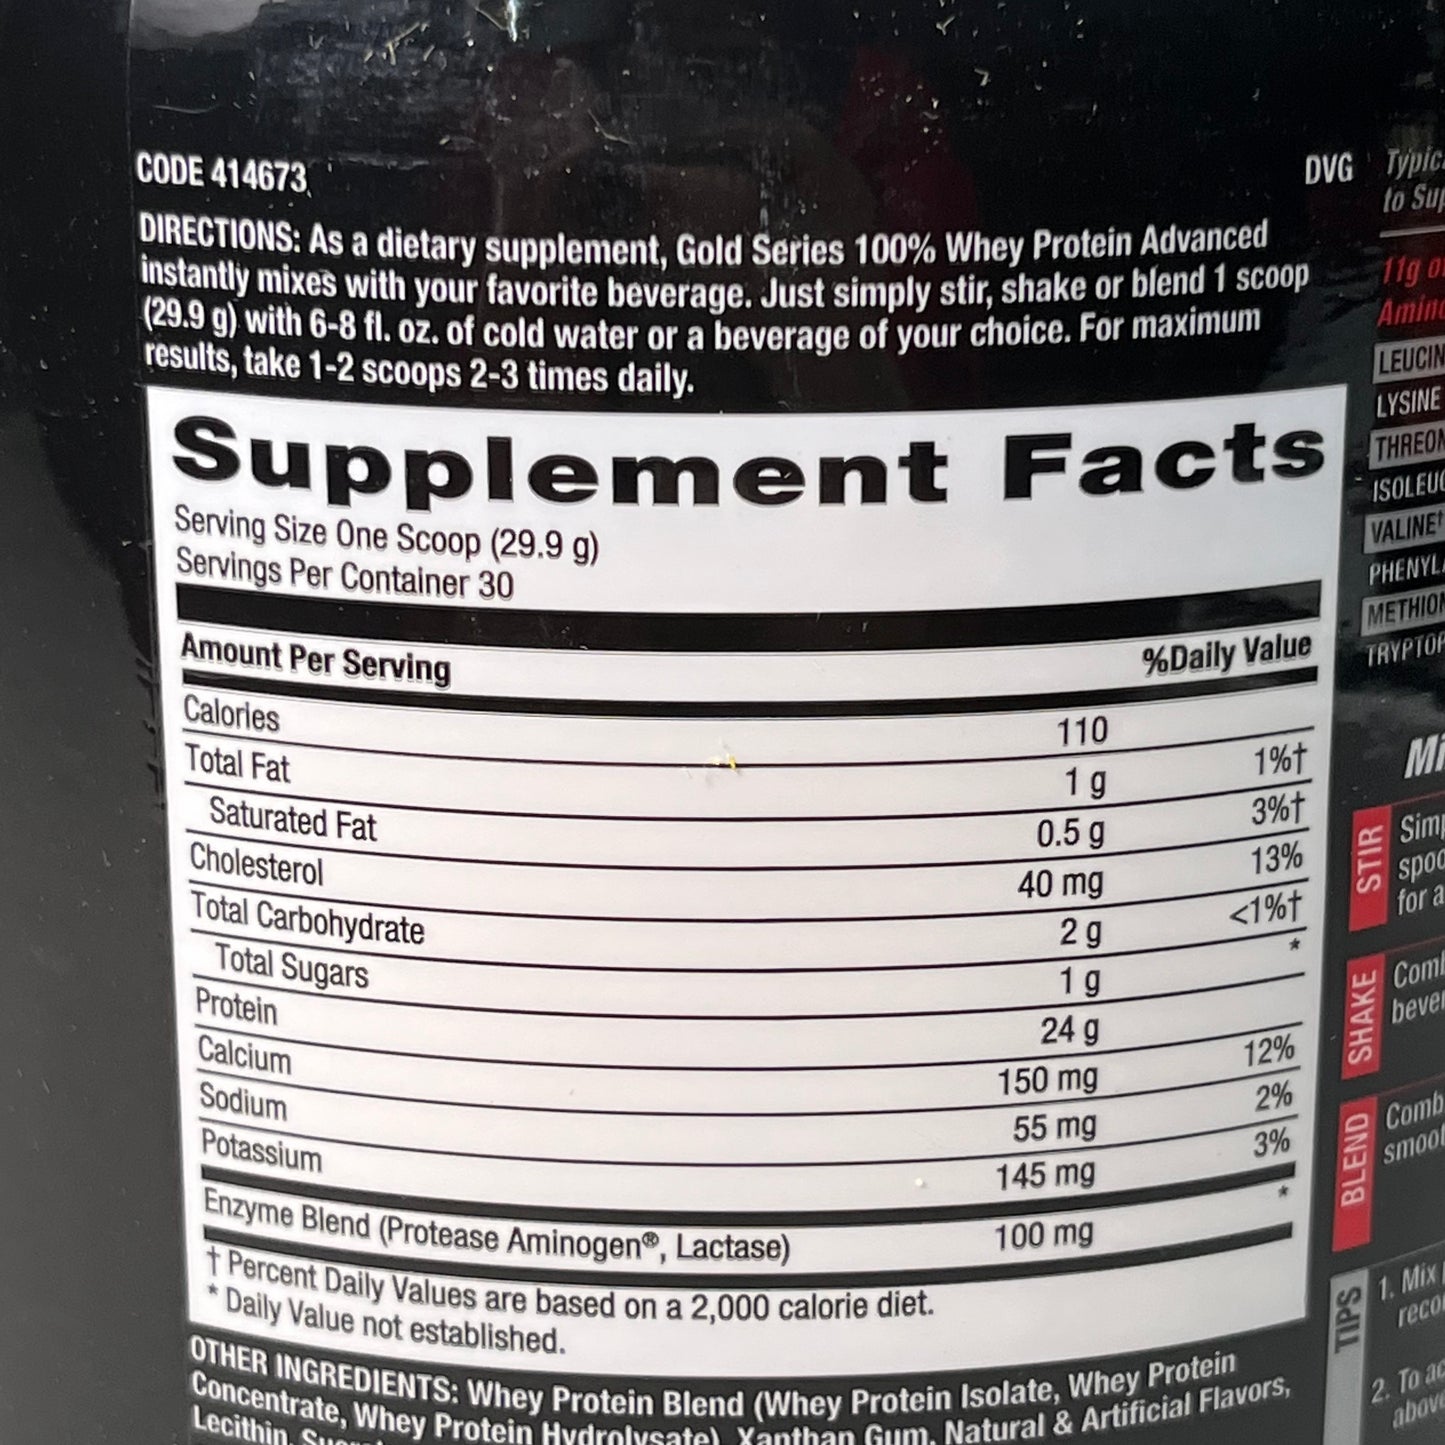 GNC Pro Performance Amp Gold Series 100% Whey Protein Delicious Strawberry 31.64 oz.  (New)